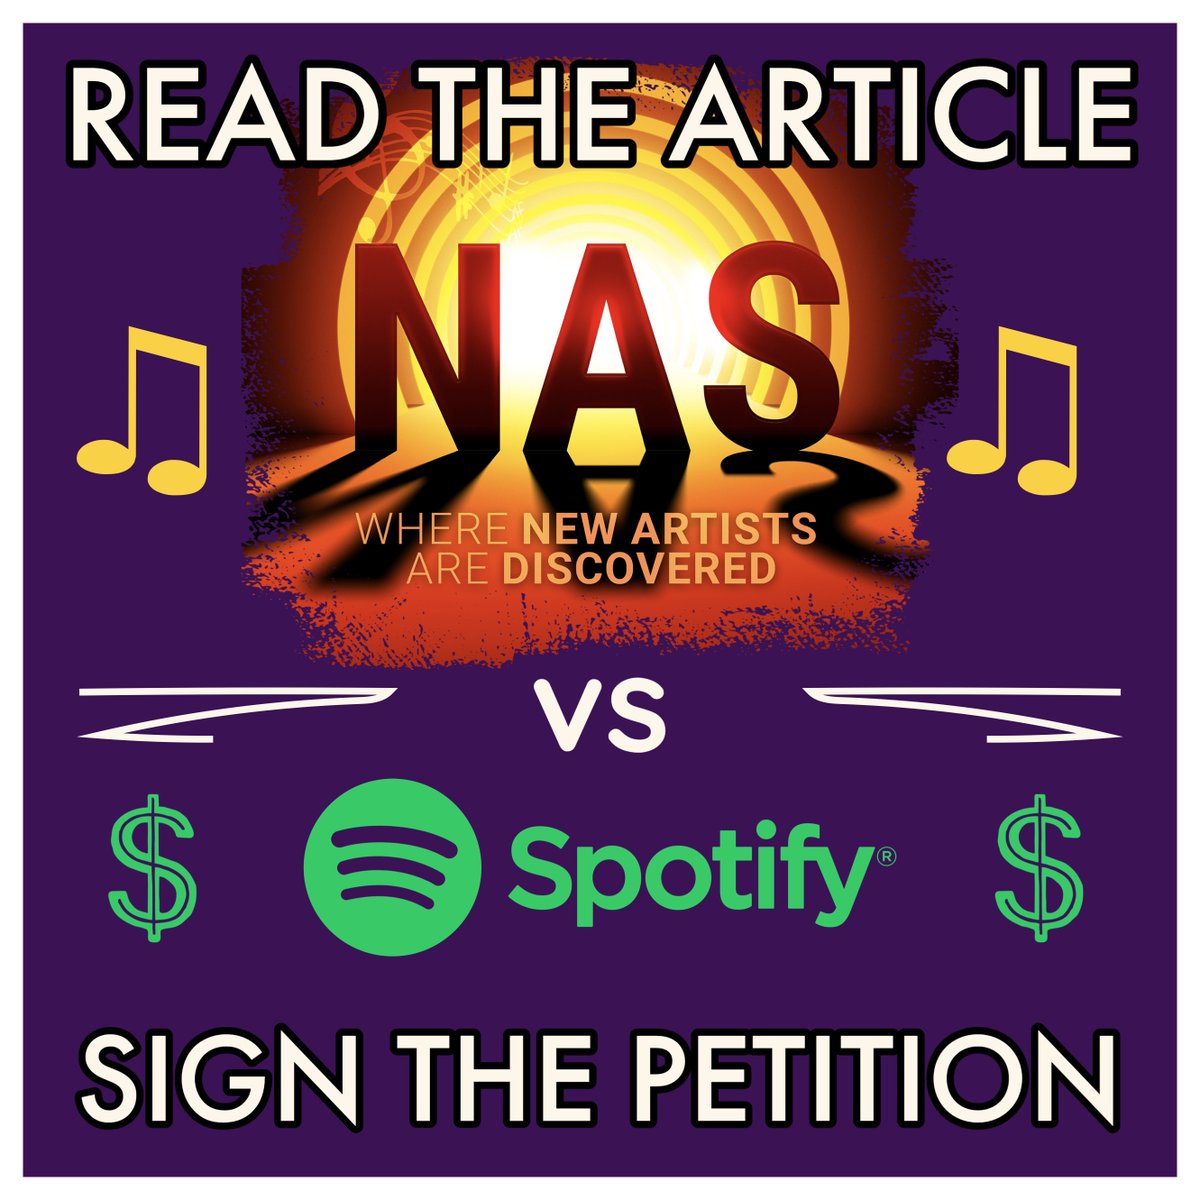 This week 𝗖𝗼𝗻𝗻𝗼𝗹𝗹𝘆'𝘀 𝗖𝗼𝗿𝗻𝗲𝗿 a call to take action #Spotify #petition #StopPayola #independentartists #ThePress #BBC #fairness #guiltyuntilproveninnocent #awareness #fort #CC @ConnollyTunes @edeagle89 newartistspotlight.org/post/fair-play…